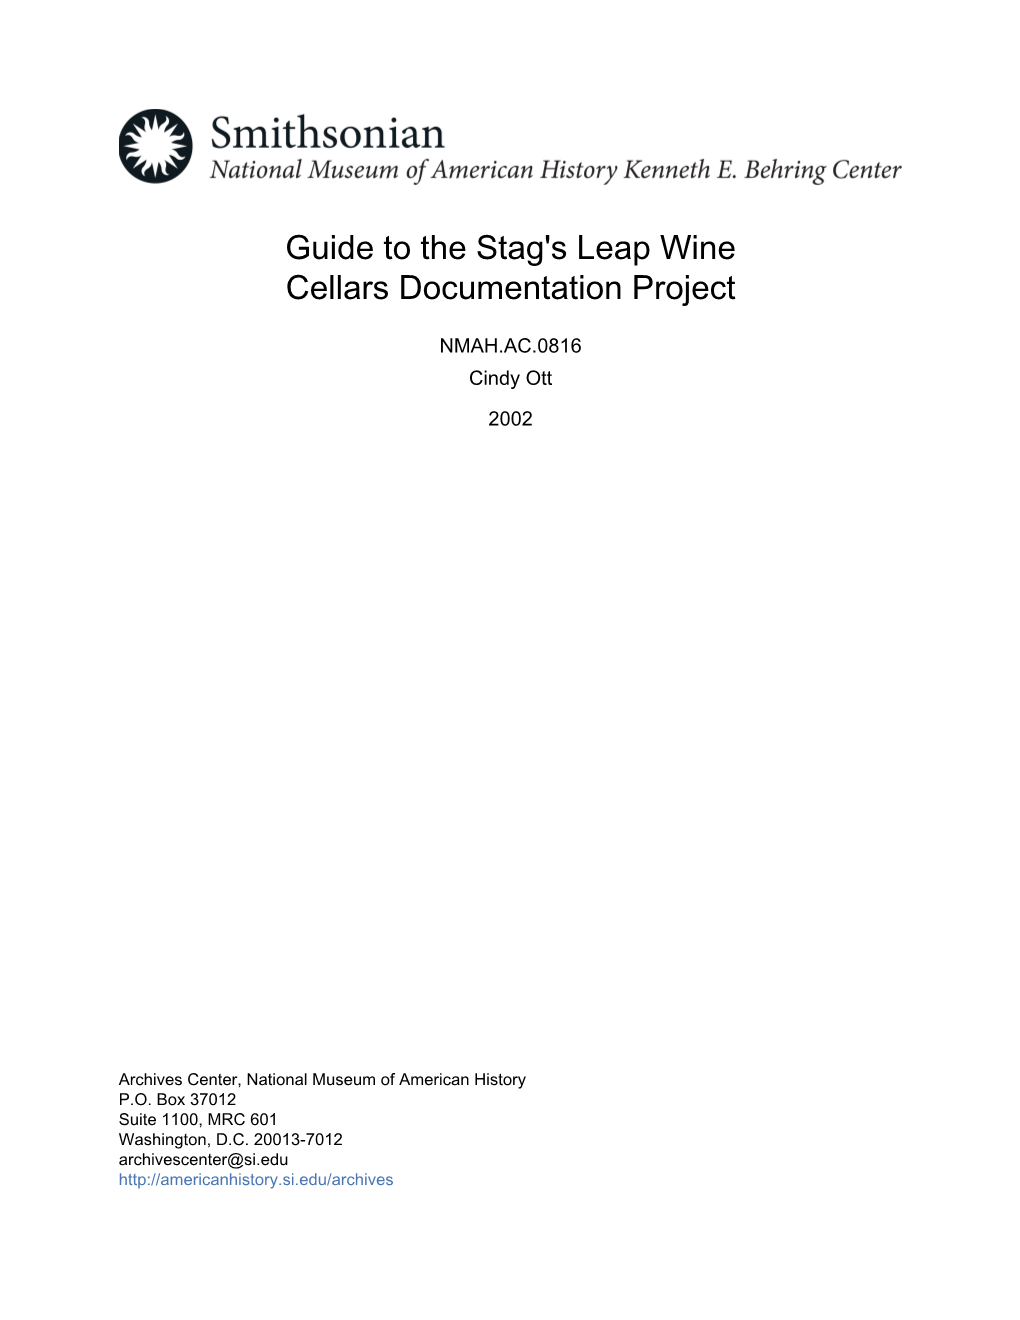 Guide to the Stag's Leap Wine Cellars Documentation Project